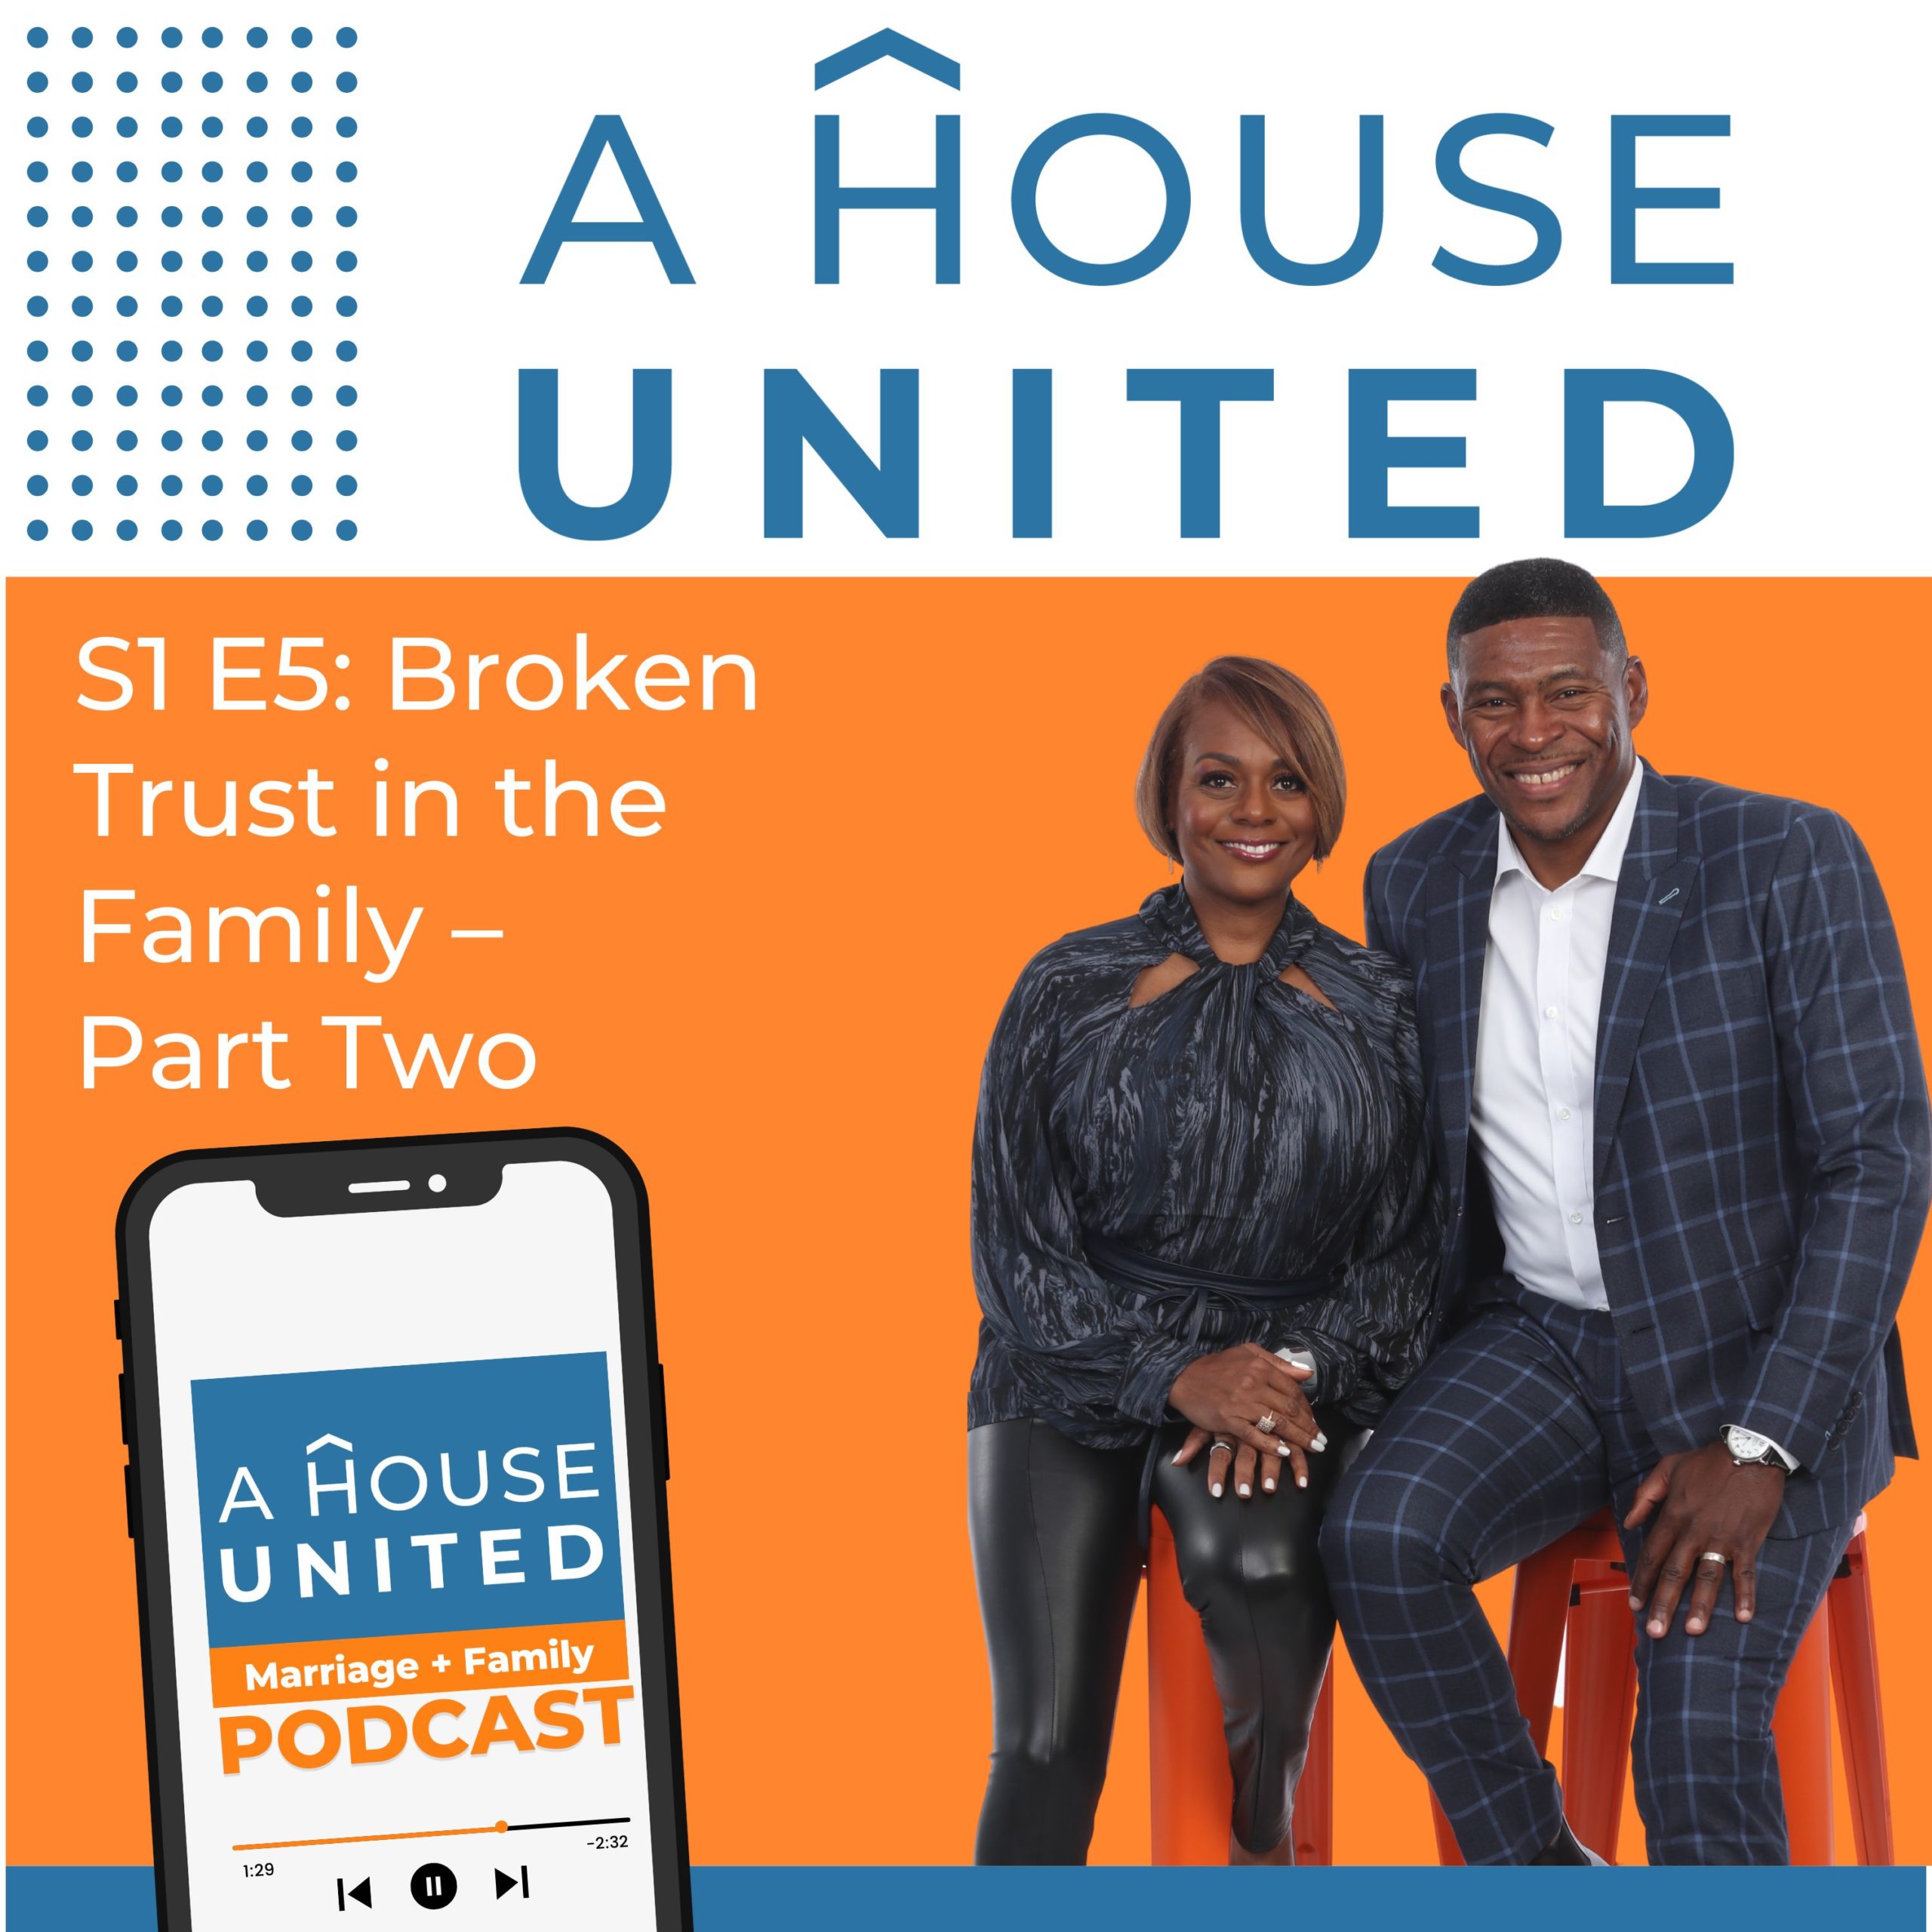 A House United S1 E5: Broken Trust in the Family – Part Two